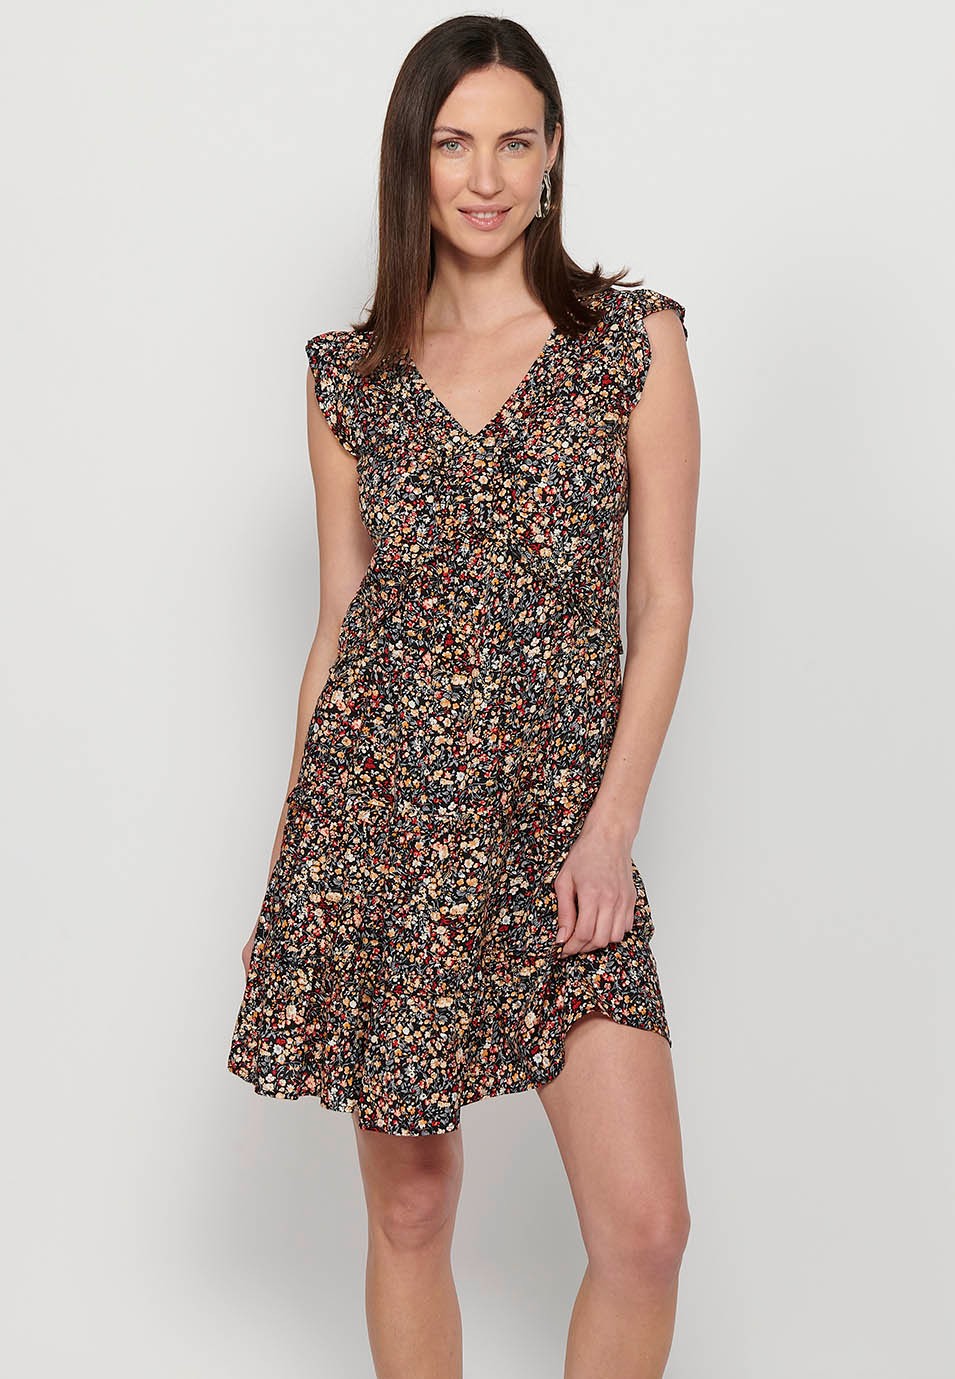 Short sleeveless dress with ruffle detail on the shoulders with V-neckline and Multicolor floral print for Women 8